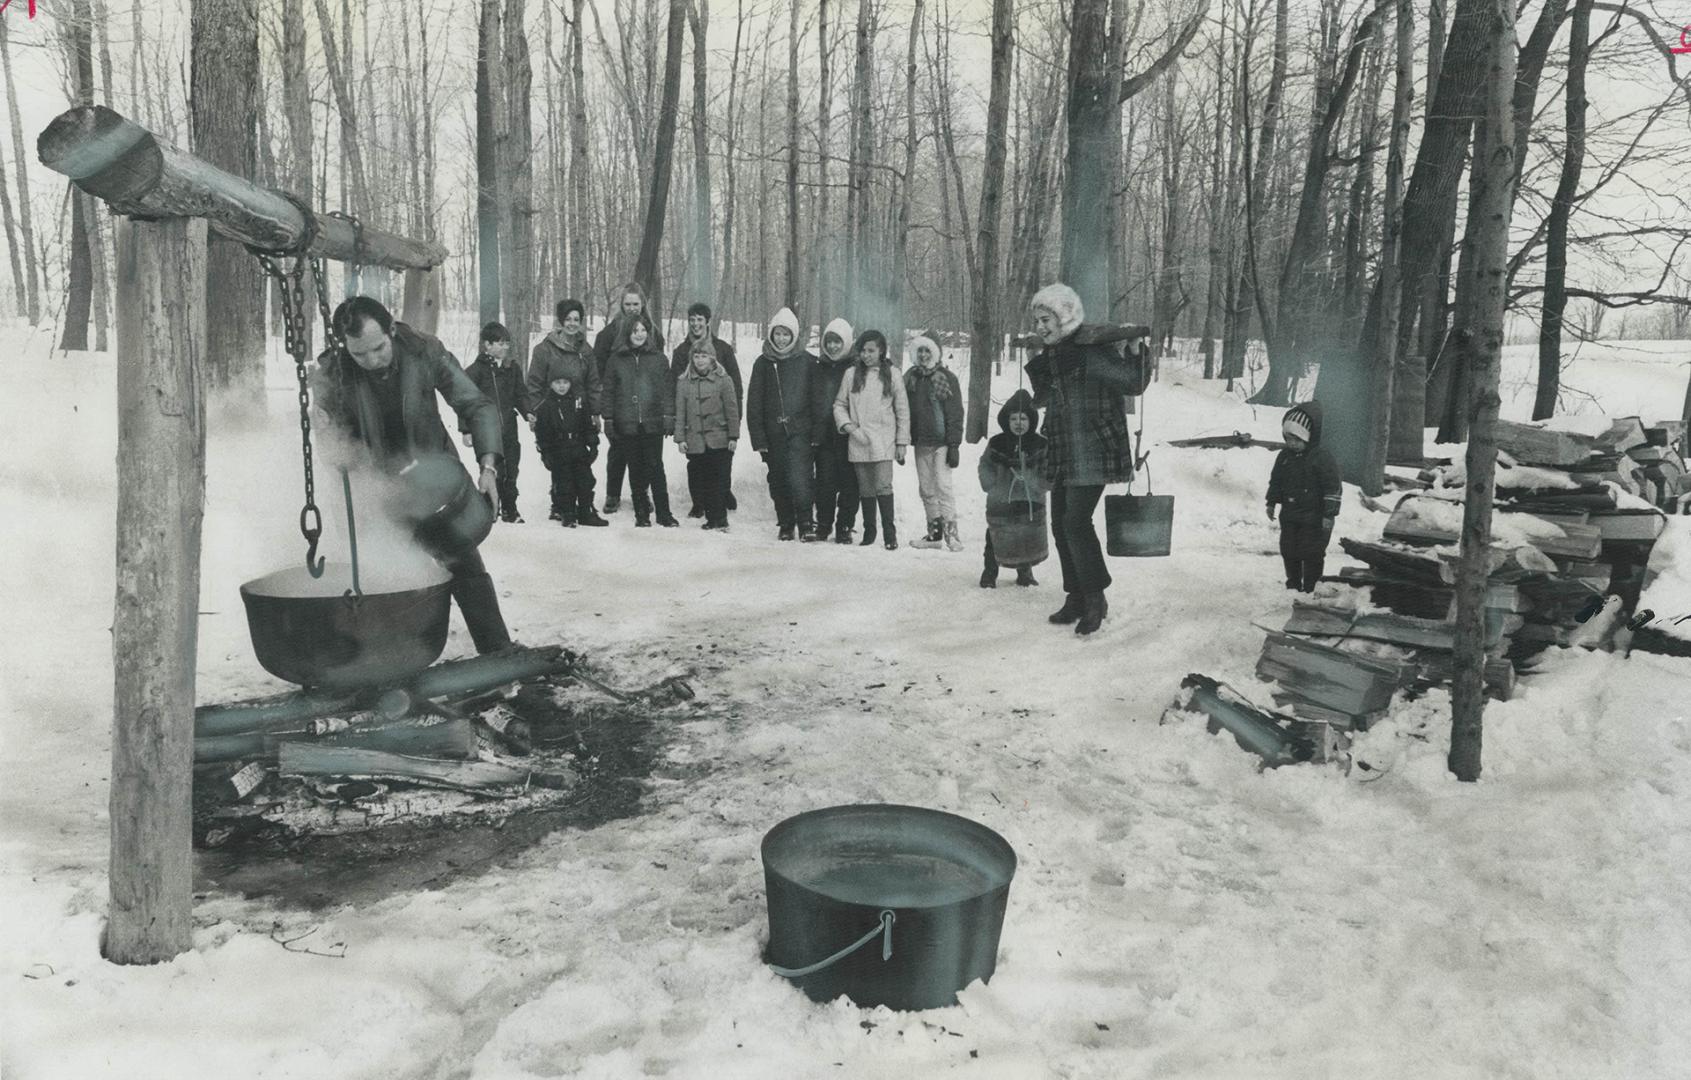 The sap is running in the maple sugar bush at Bruce's Mill Conservation Area, 20 miles northeast of Metro, and Rod Martin, 31, a teacher from North Yo(...)